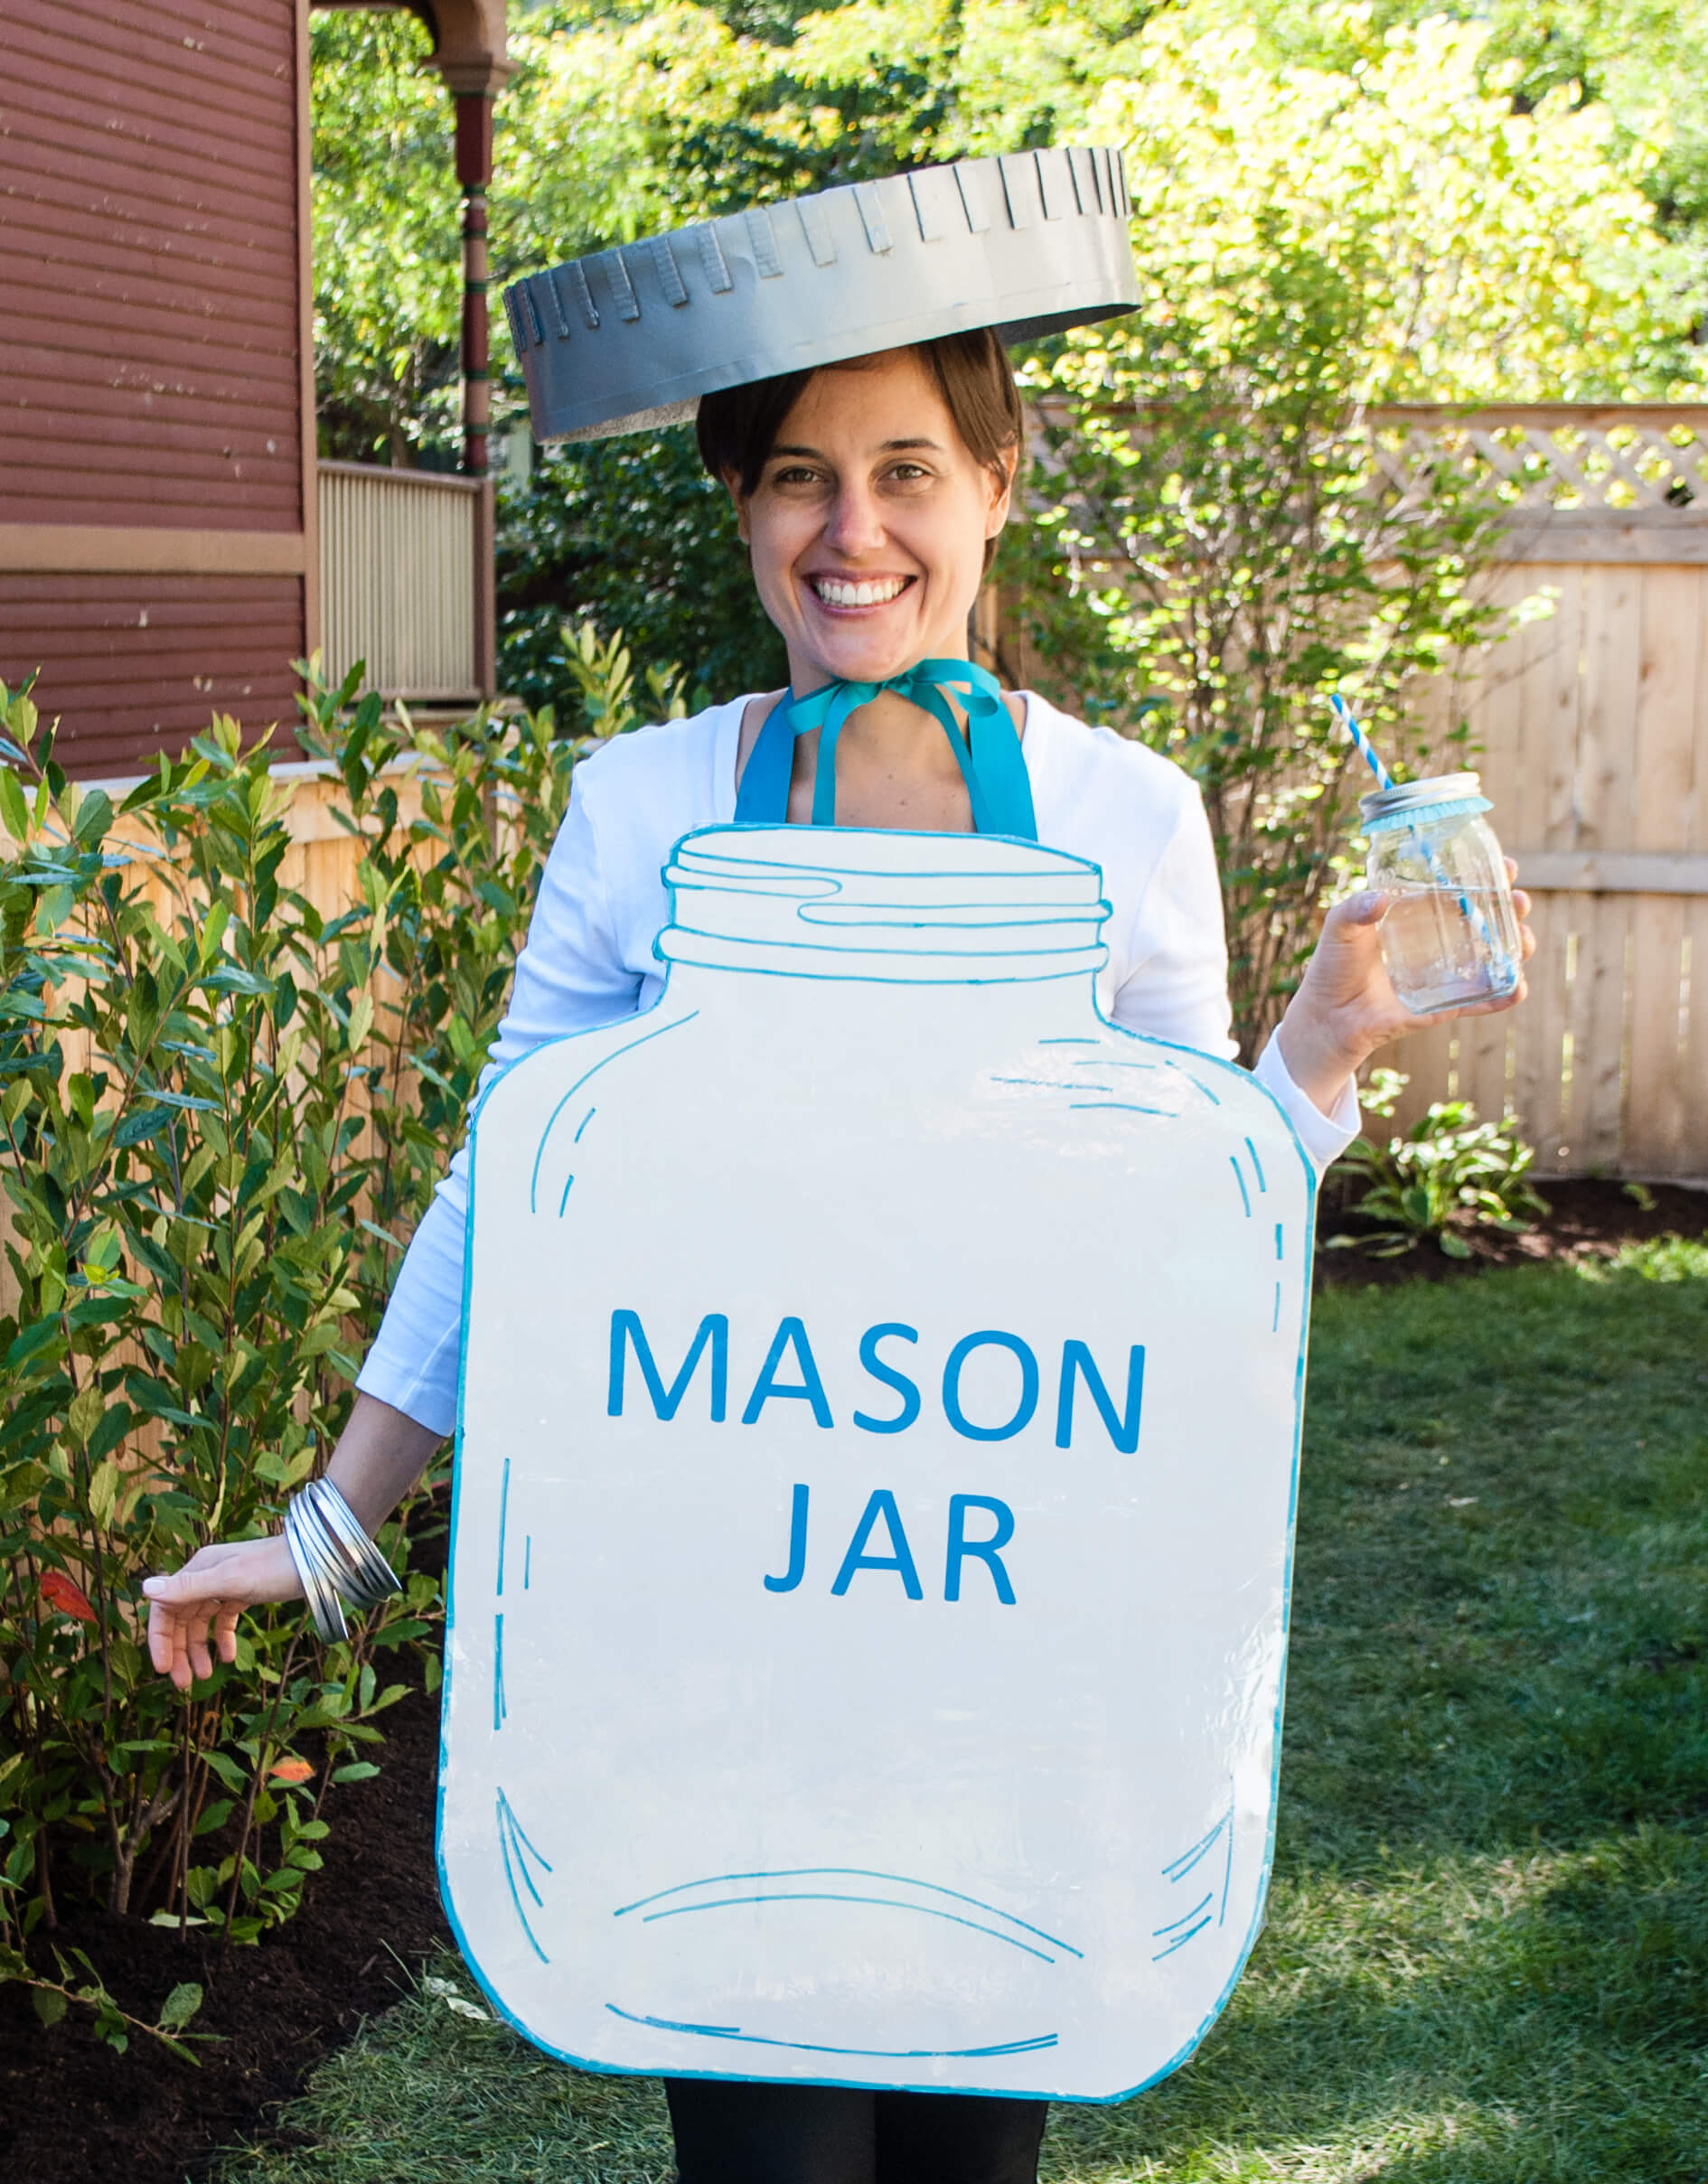 Easy DIY Halloween Costumes For Adults
 Mason Jar Halloween Costume Easy DIY Halloween Costume